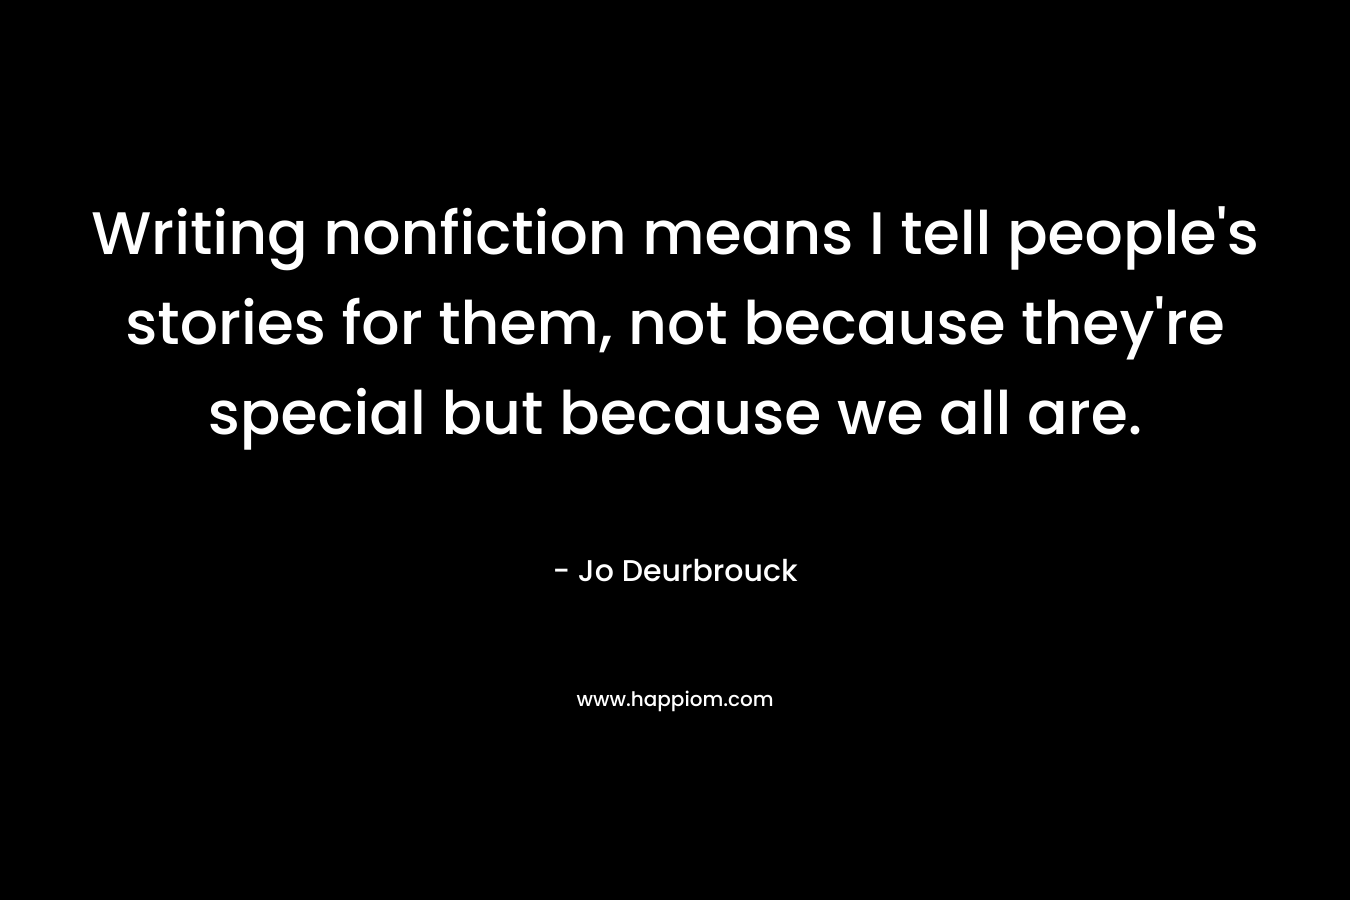 Writing nonfiction means I tell people’s stories for them, not because they’re special but because we all are. – Jo Deurbrouck